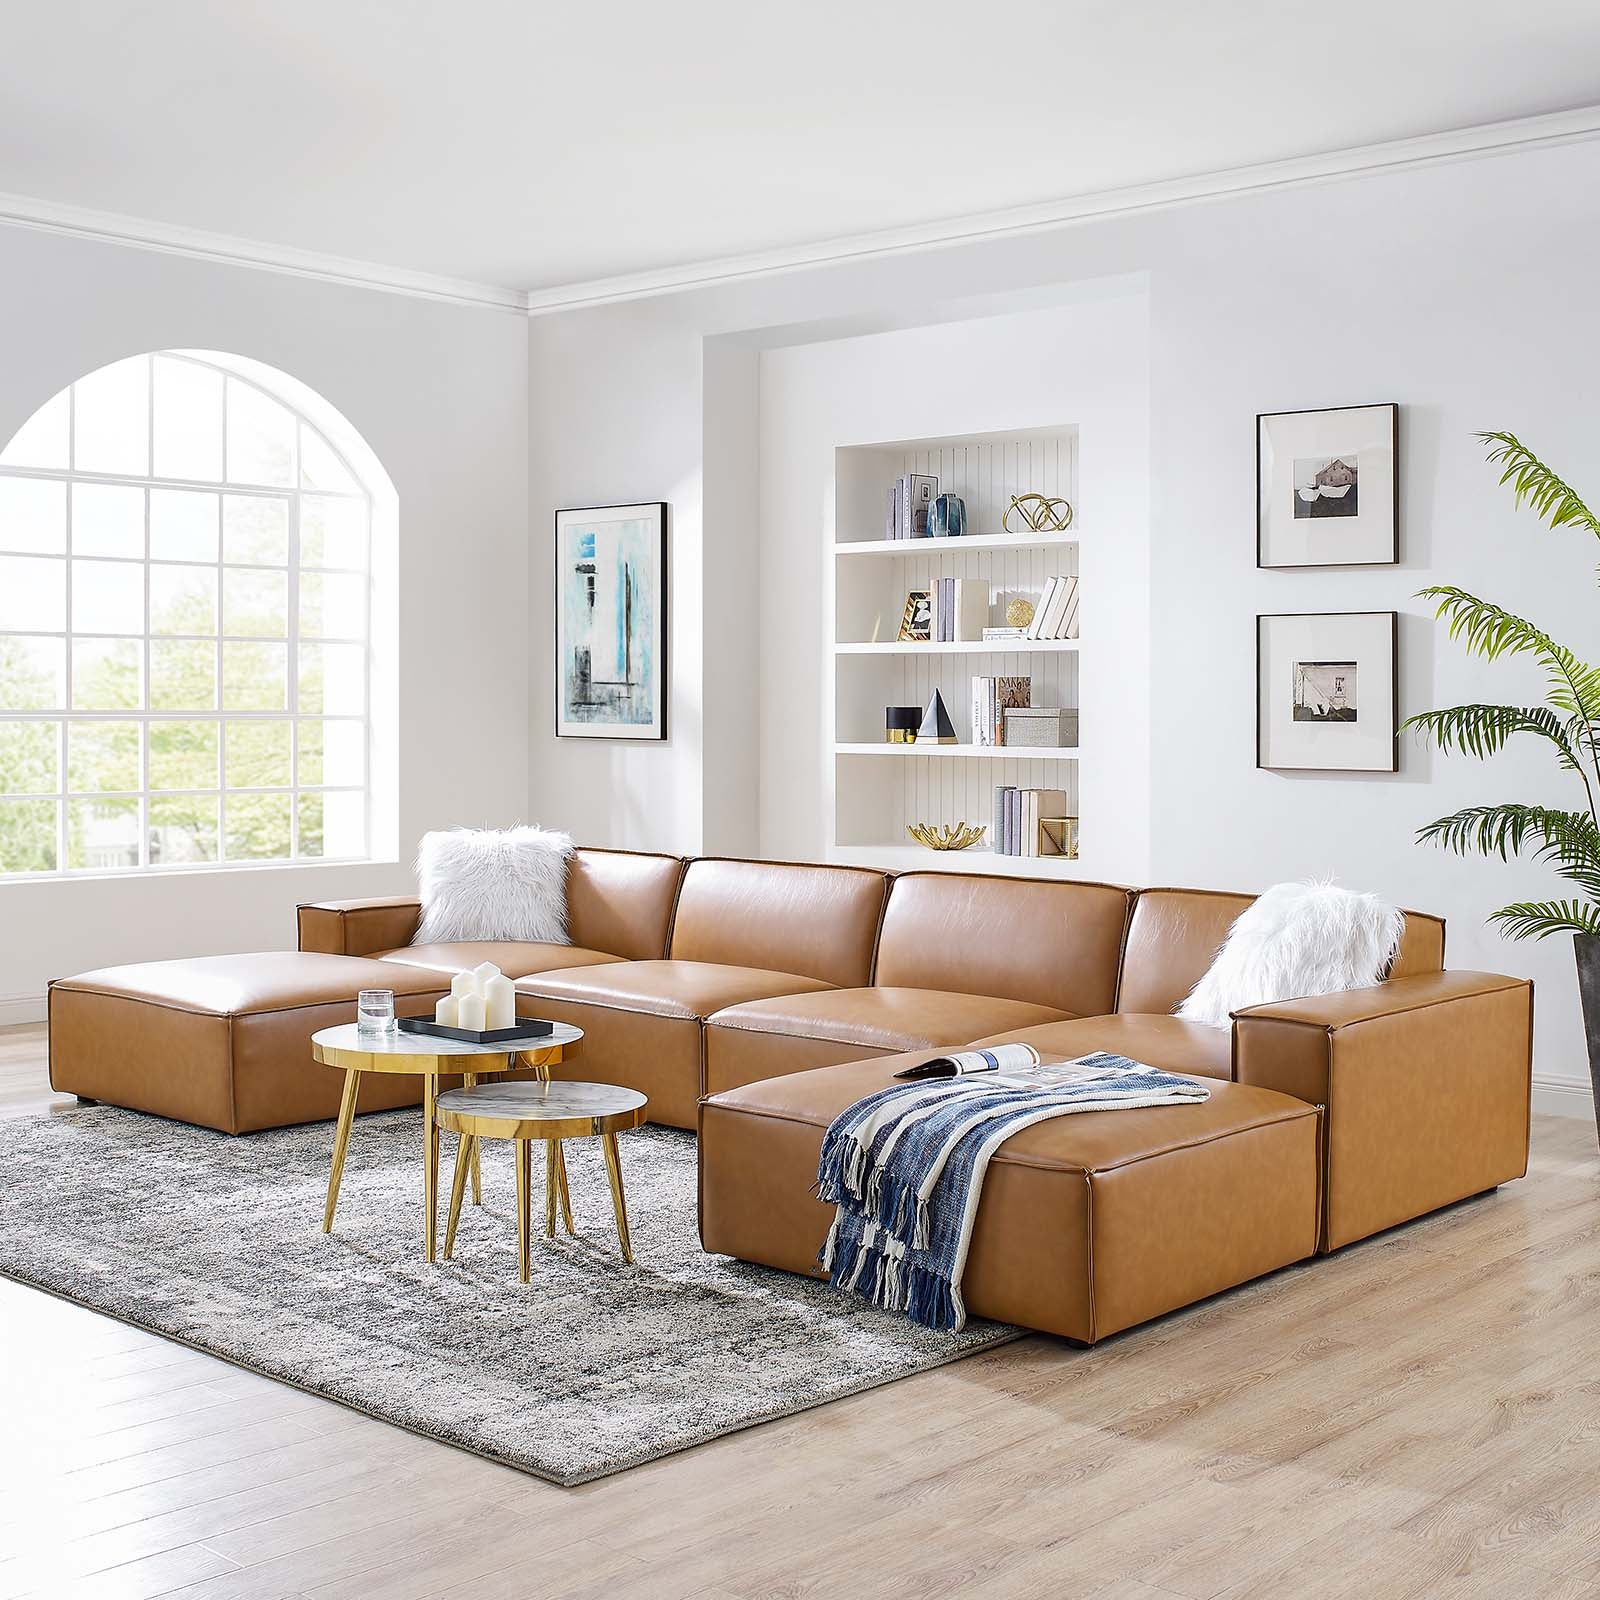 Restore 6-Piece Vegan Leather Sectional Sofa - East Shore Modern Home Furnishings